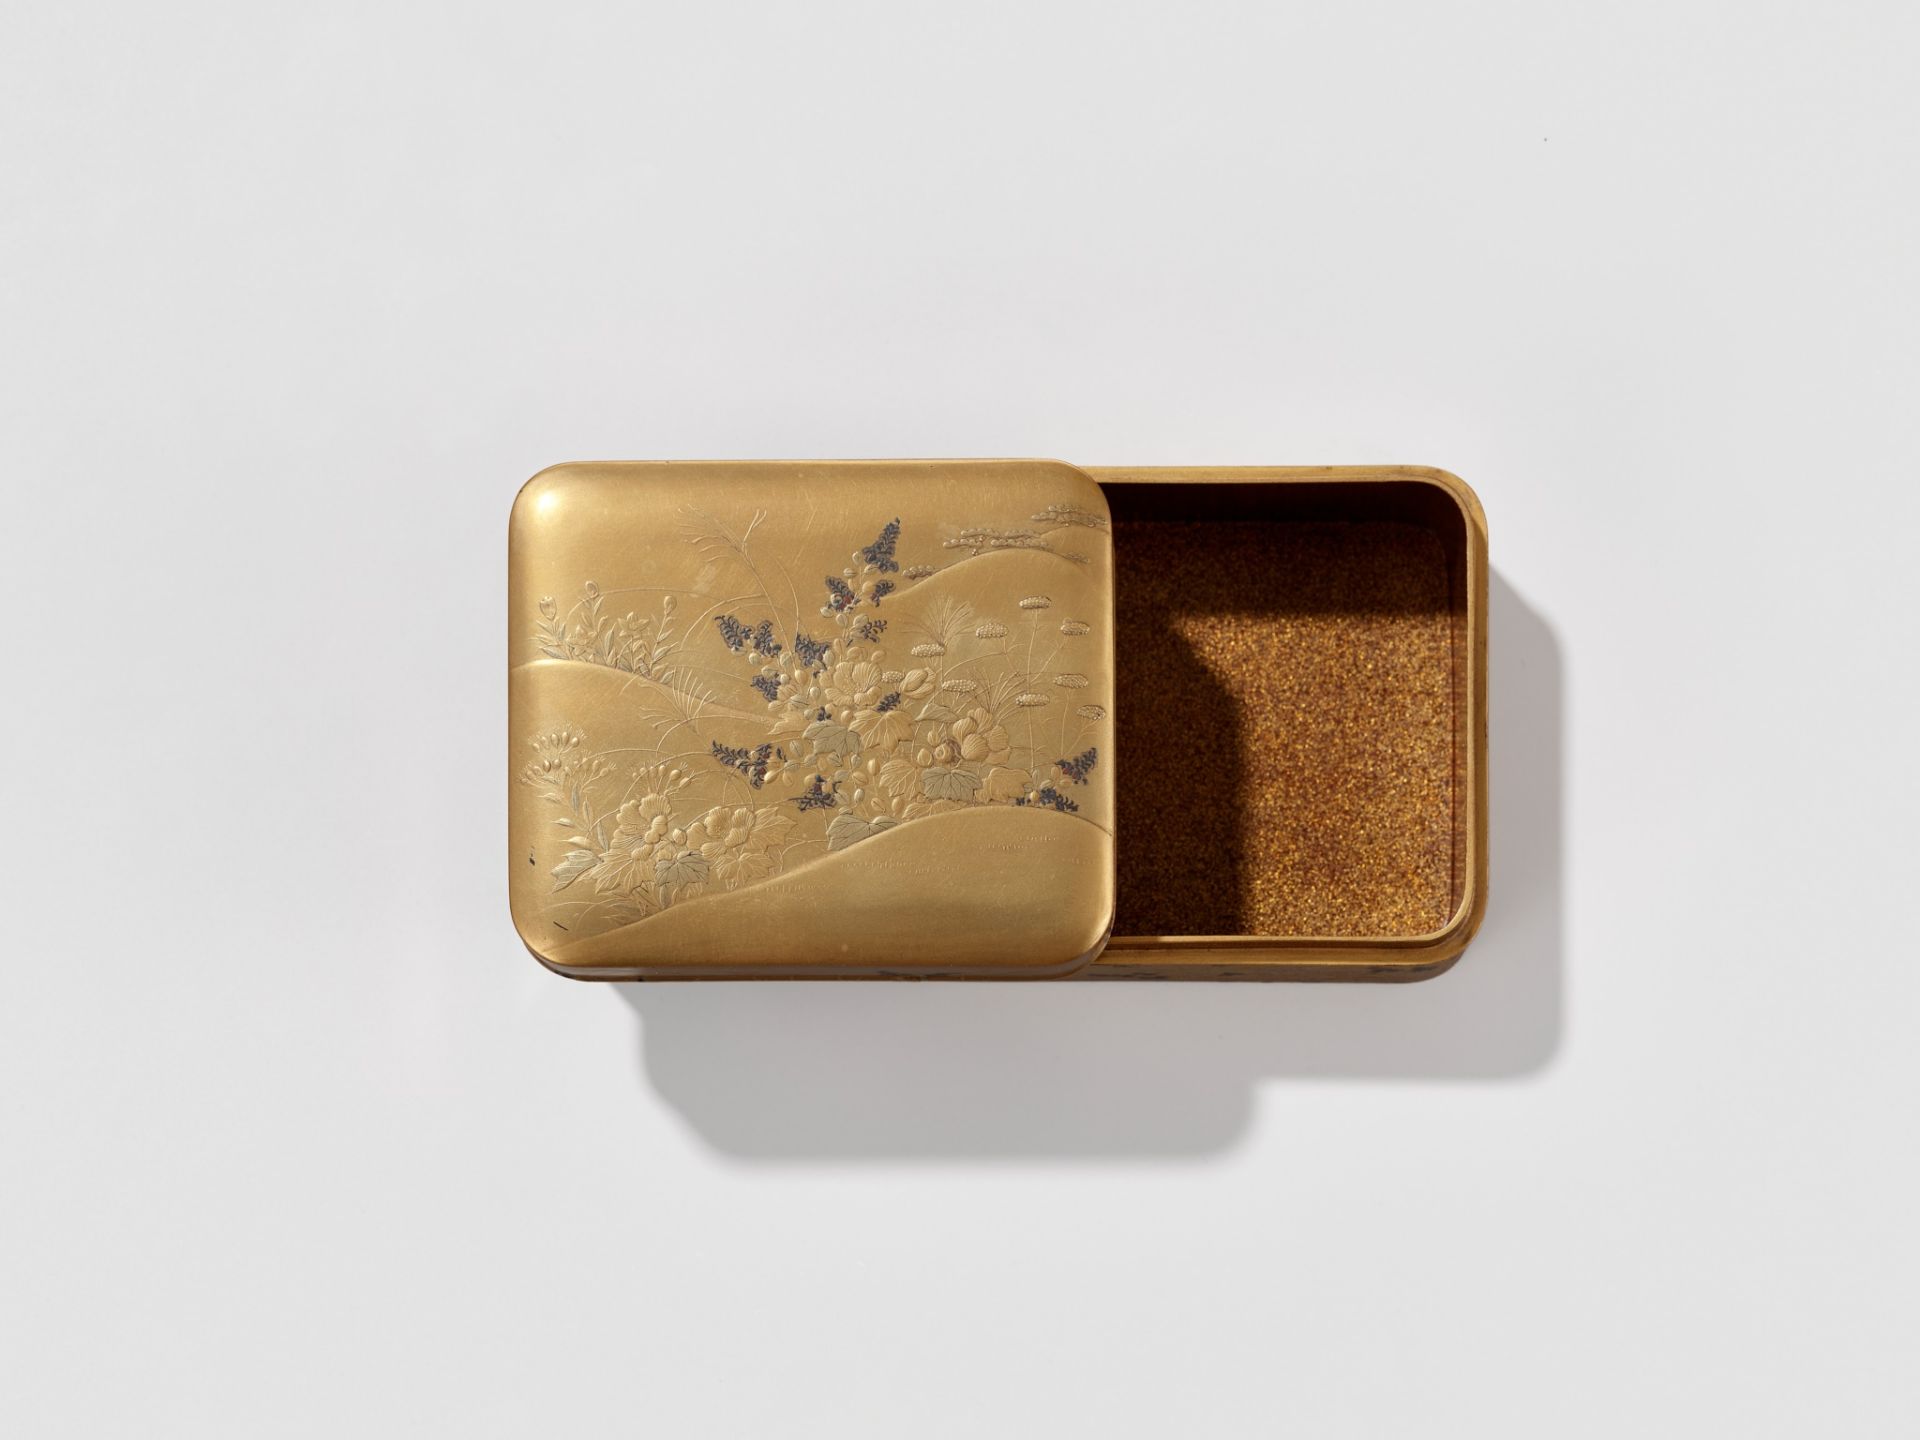 A LACQUER KOBAKO (SMALL BOX) AND COVER WITH AUTUMN FLOWERS - Image 2 of 10